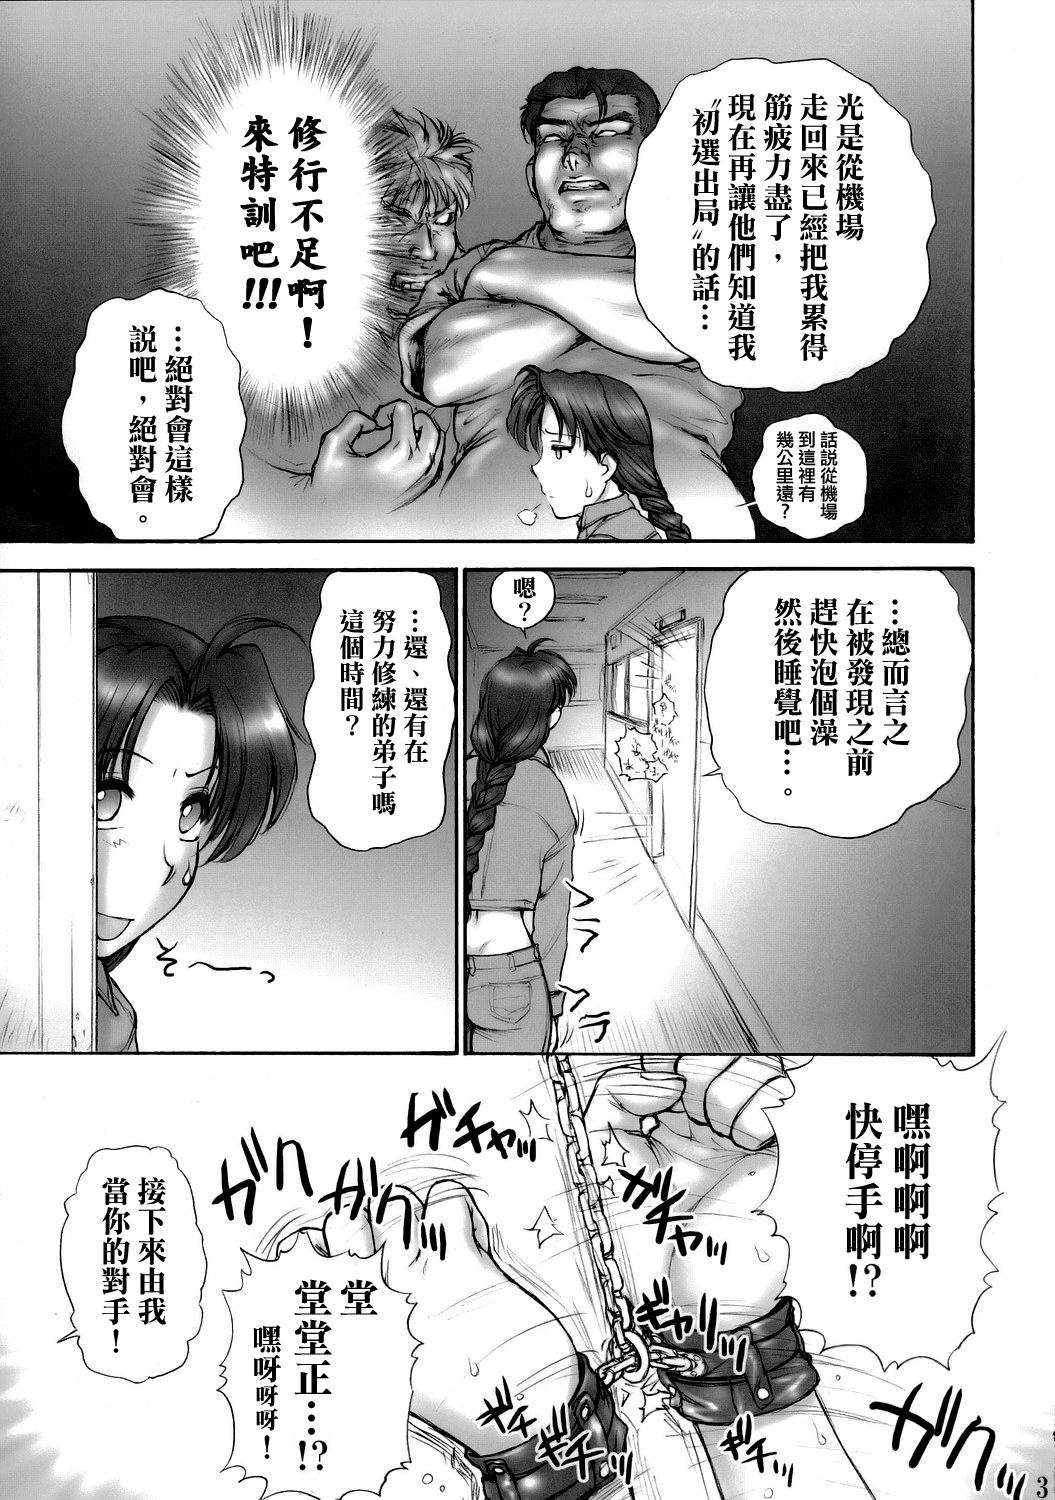 Holes (SC29) [Shinnihon Pepsitou (St. Germain-sal)] Report Concerning Kyoku-gen-ryuu (The King of Fighters) [Chinese] [日祈漢化] - King of fighters Hot Naked Girl - Page 5